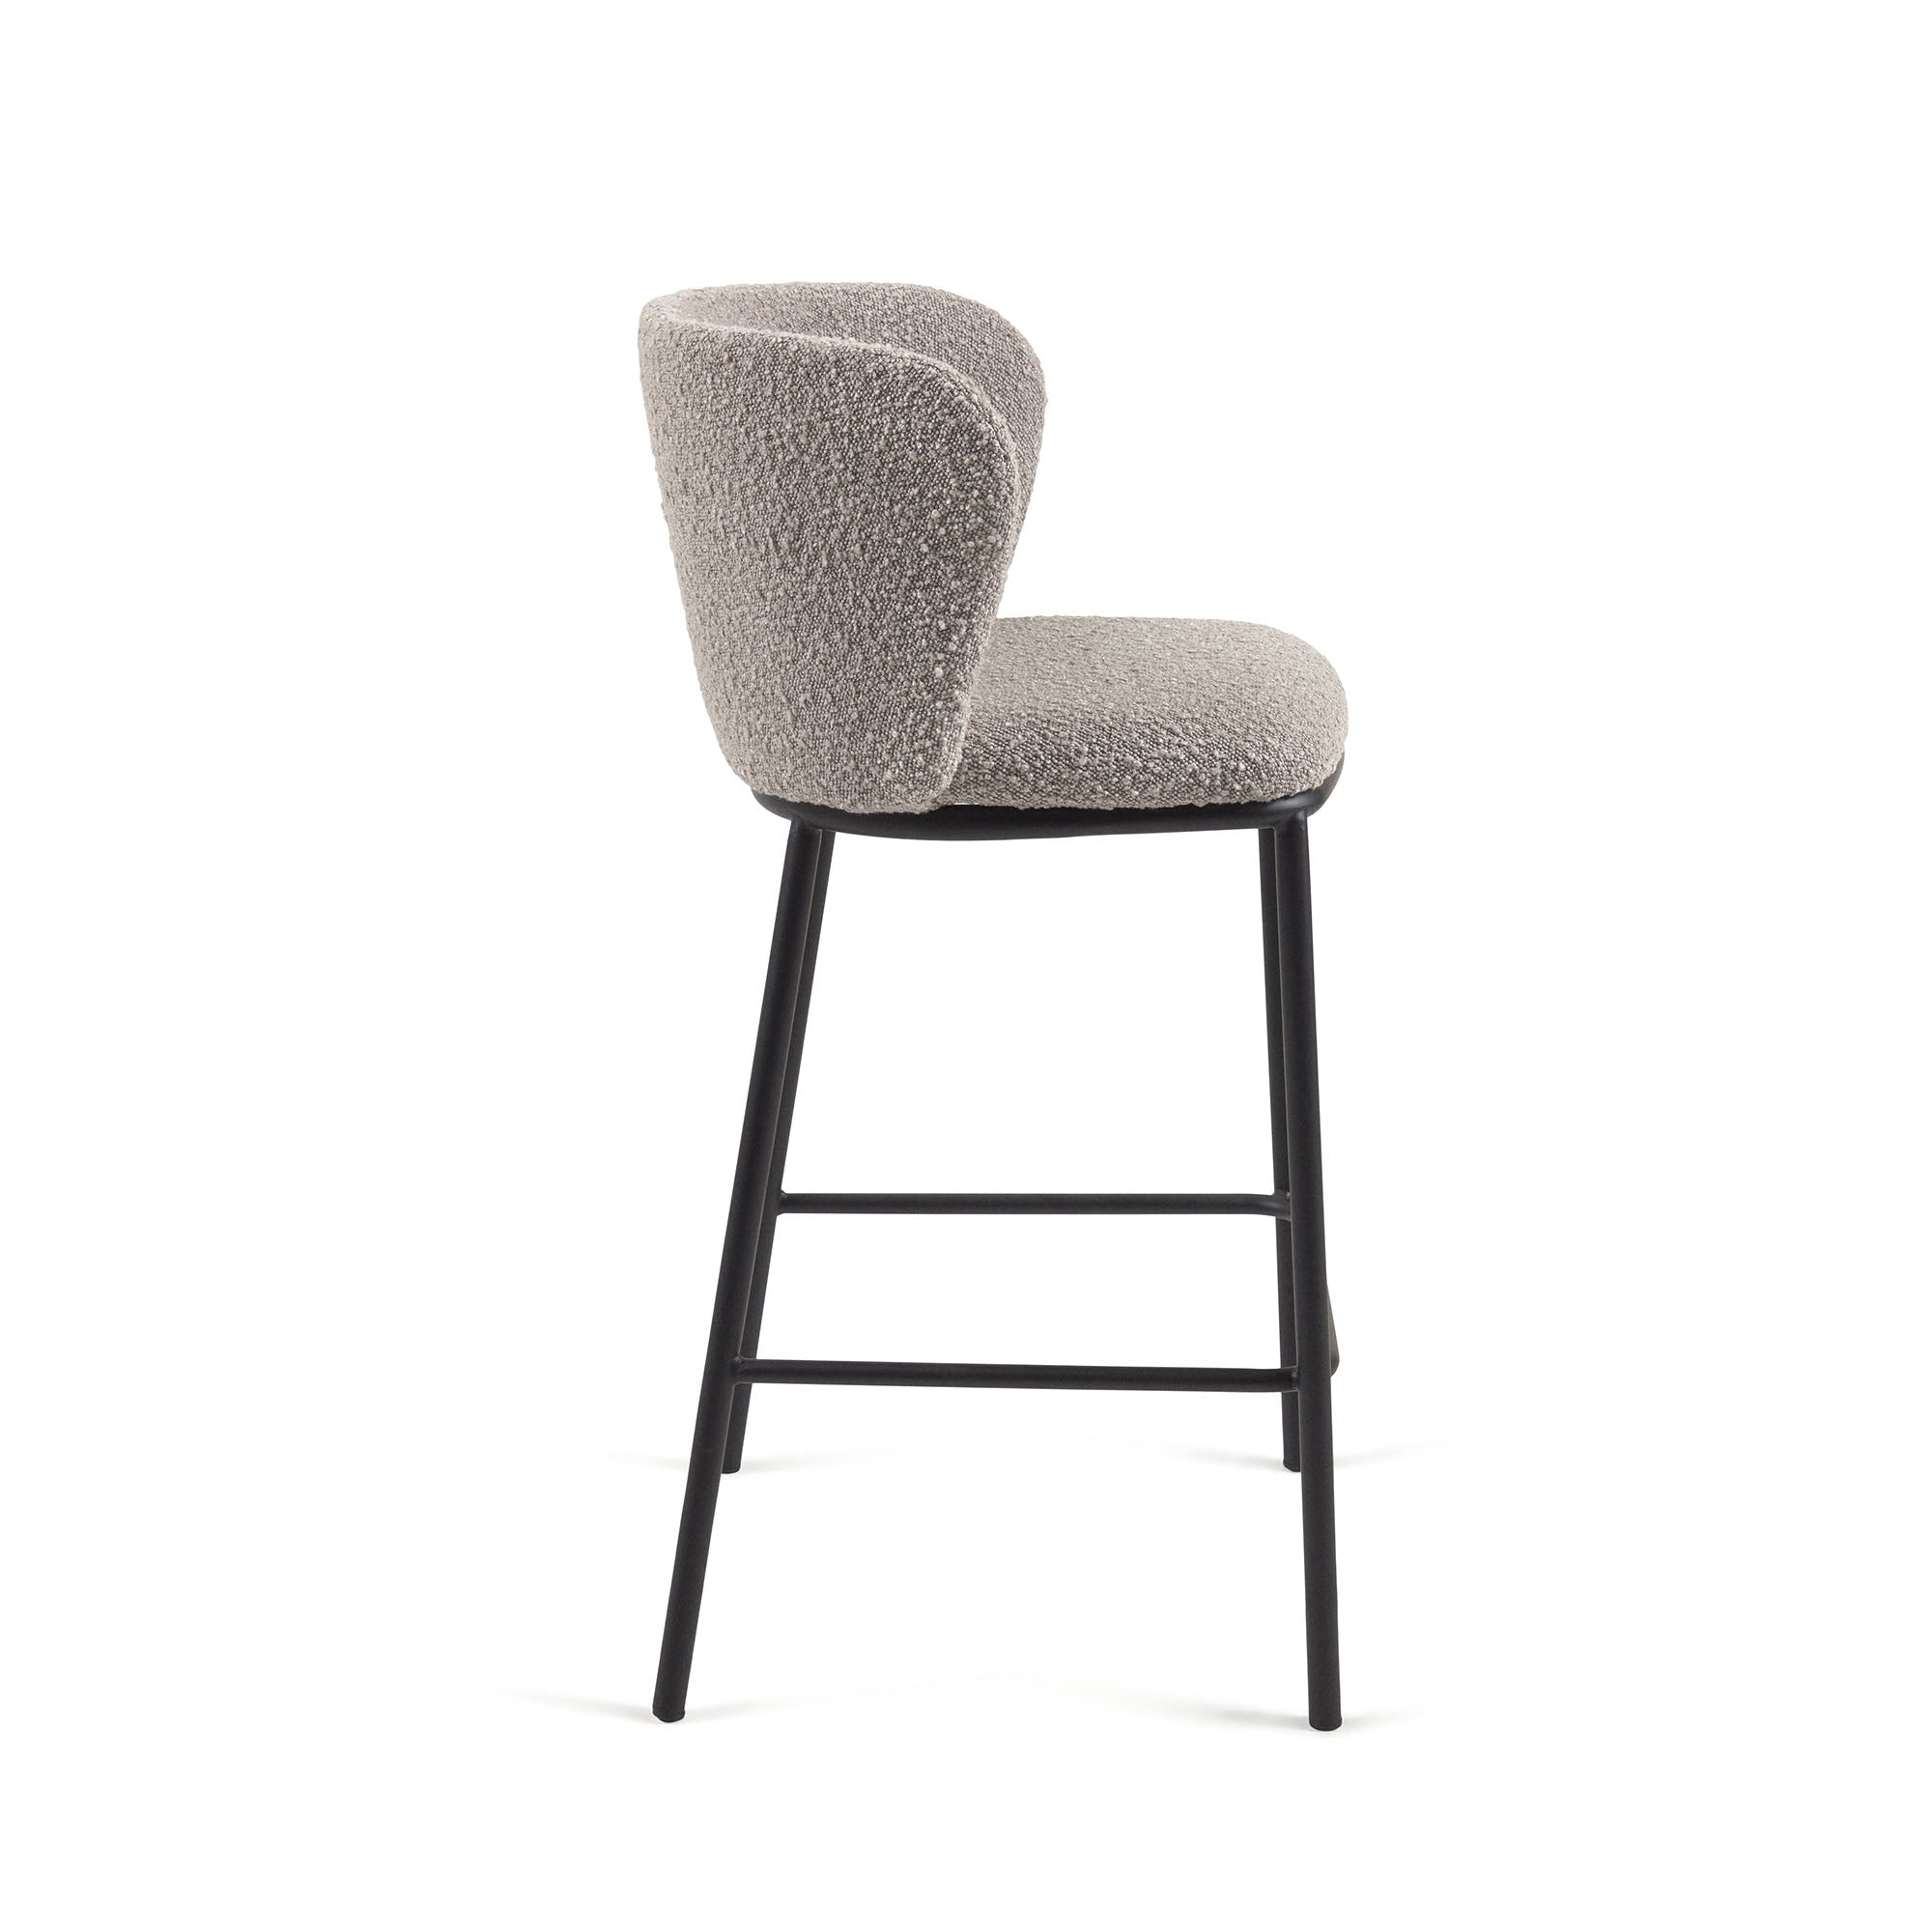 Ciselia stool with light grey shearling and black metal, height 65 cm